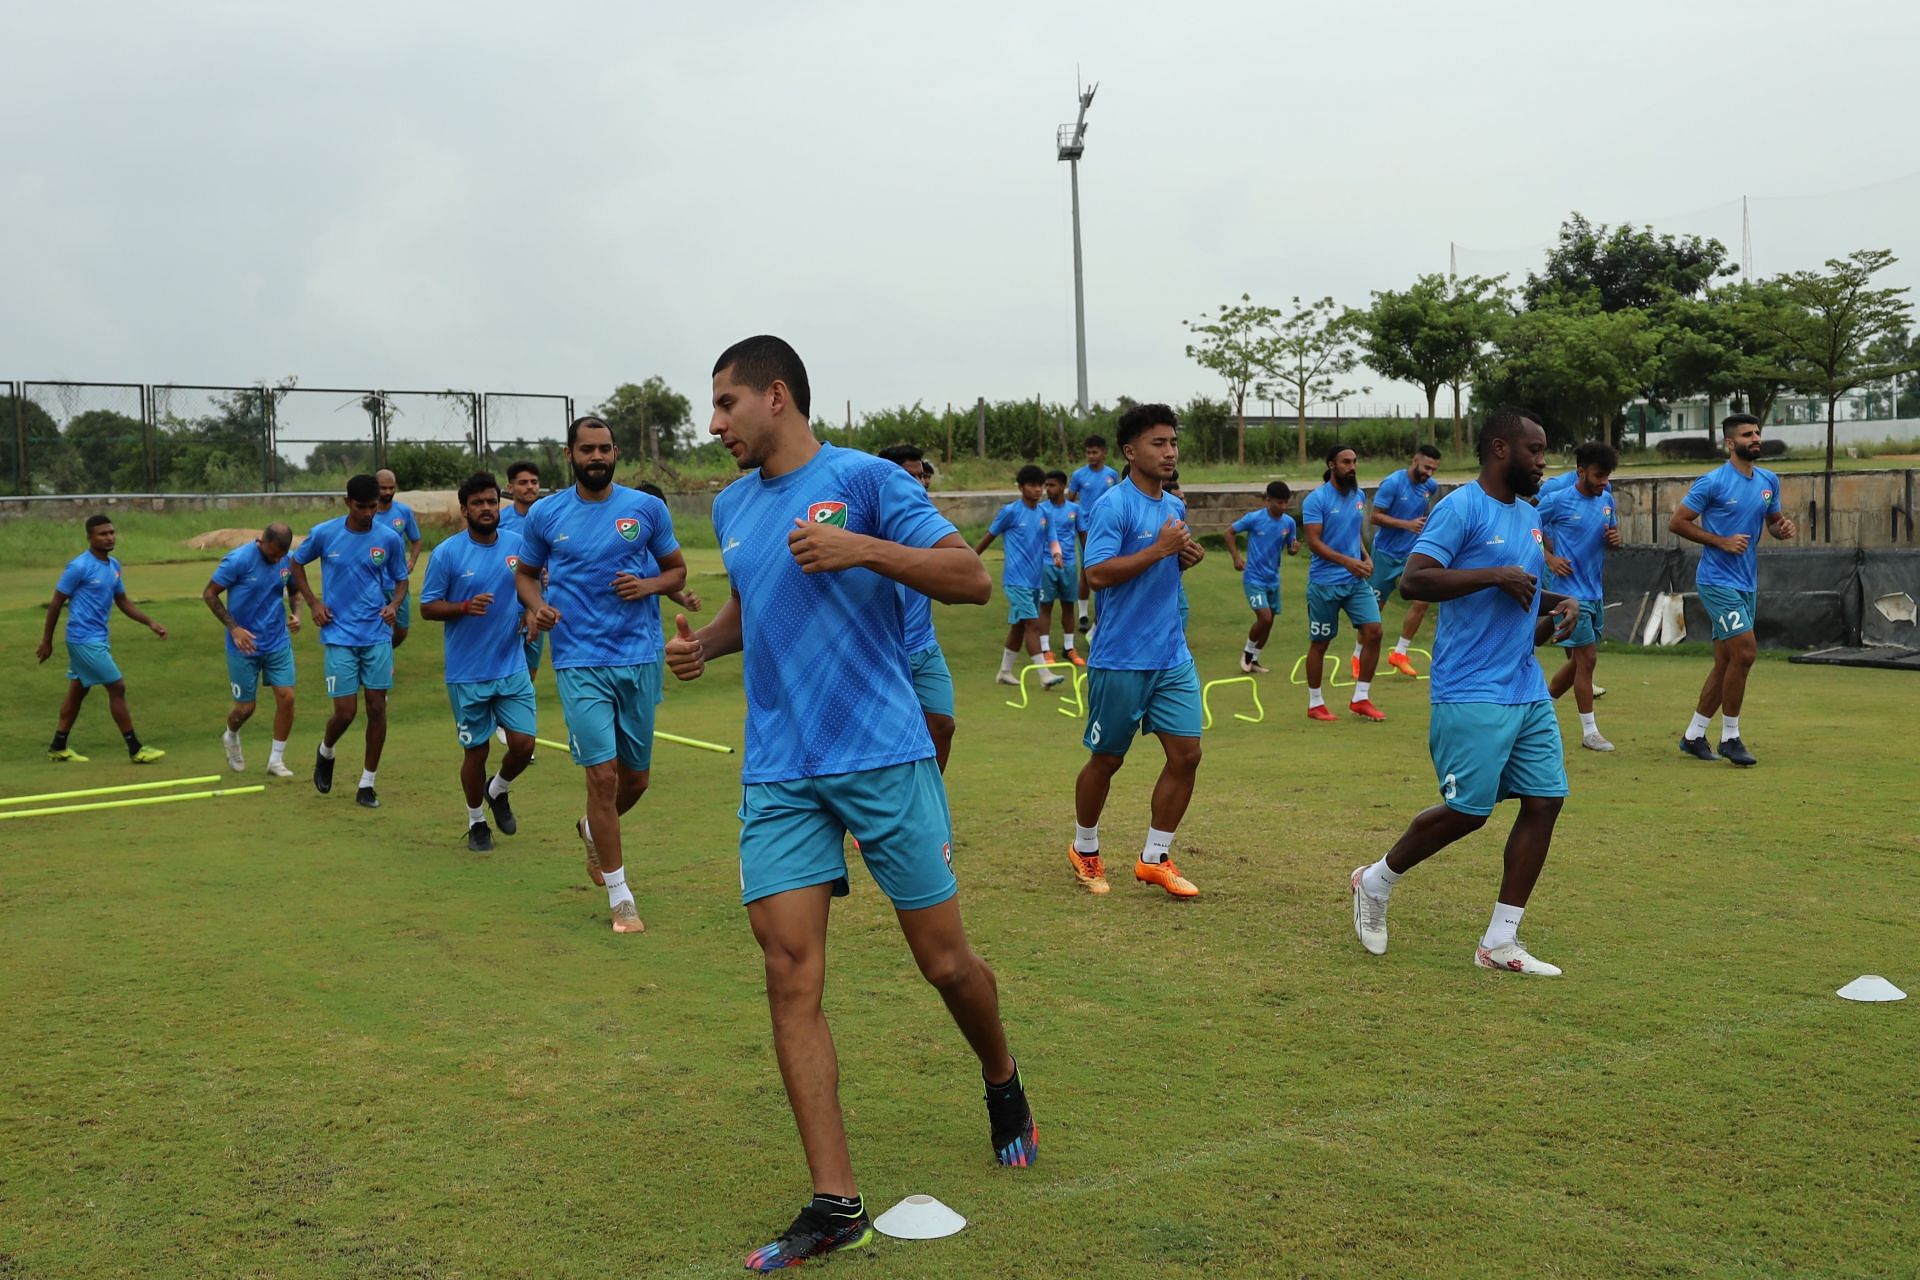 Players of Sreenidi Deccan are being put through their paces in a fitness training session.